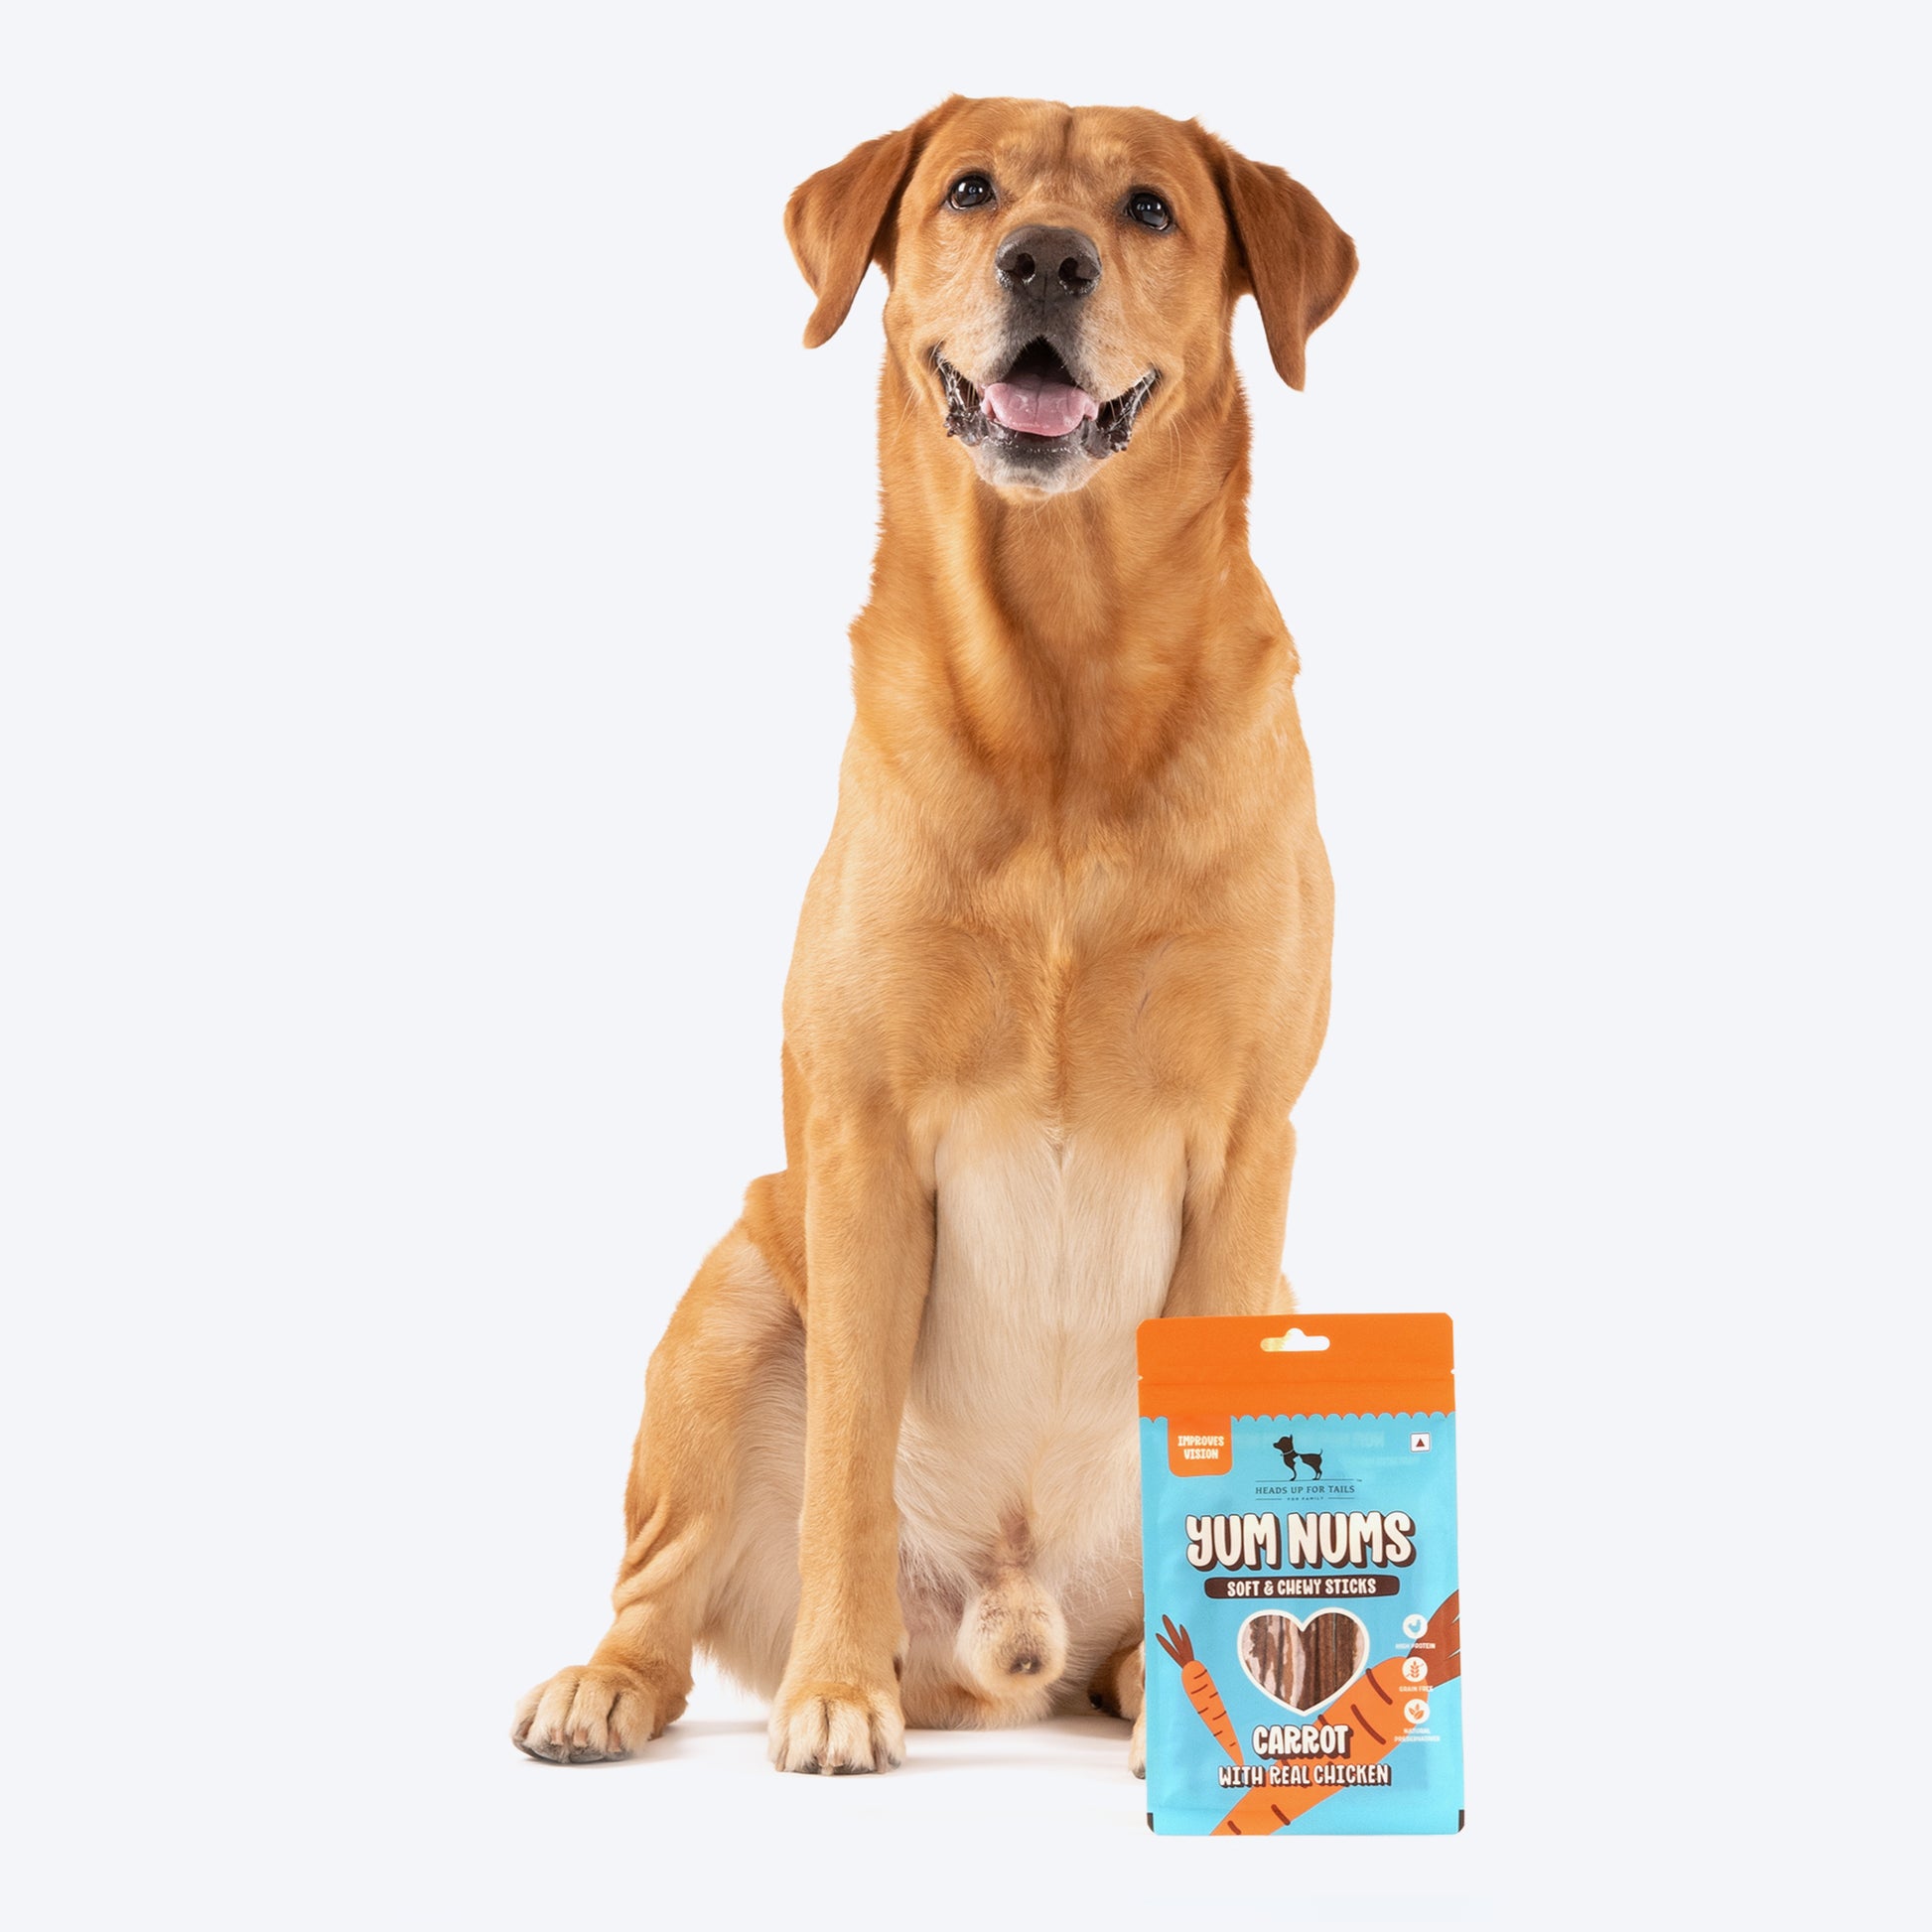 HUFT Yum Nums Soft & Chewy Sticks Carrot With Real Chicken Treat For Dogs - 75 g - Heads Up For Tails